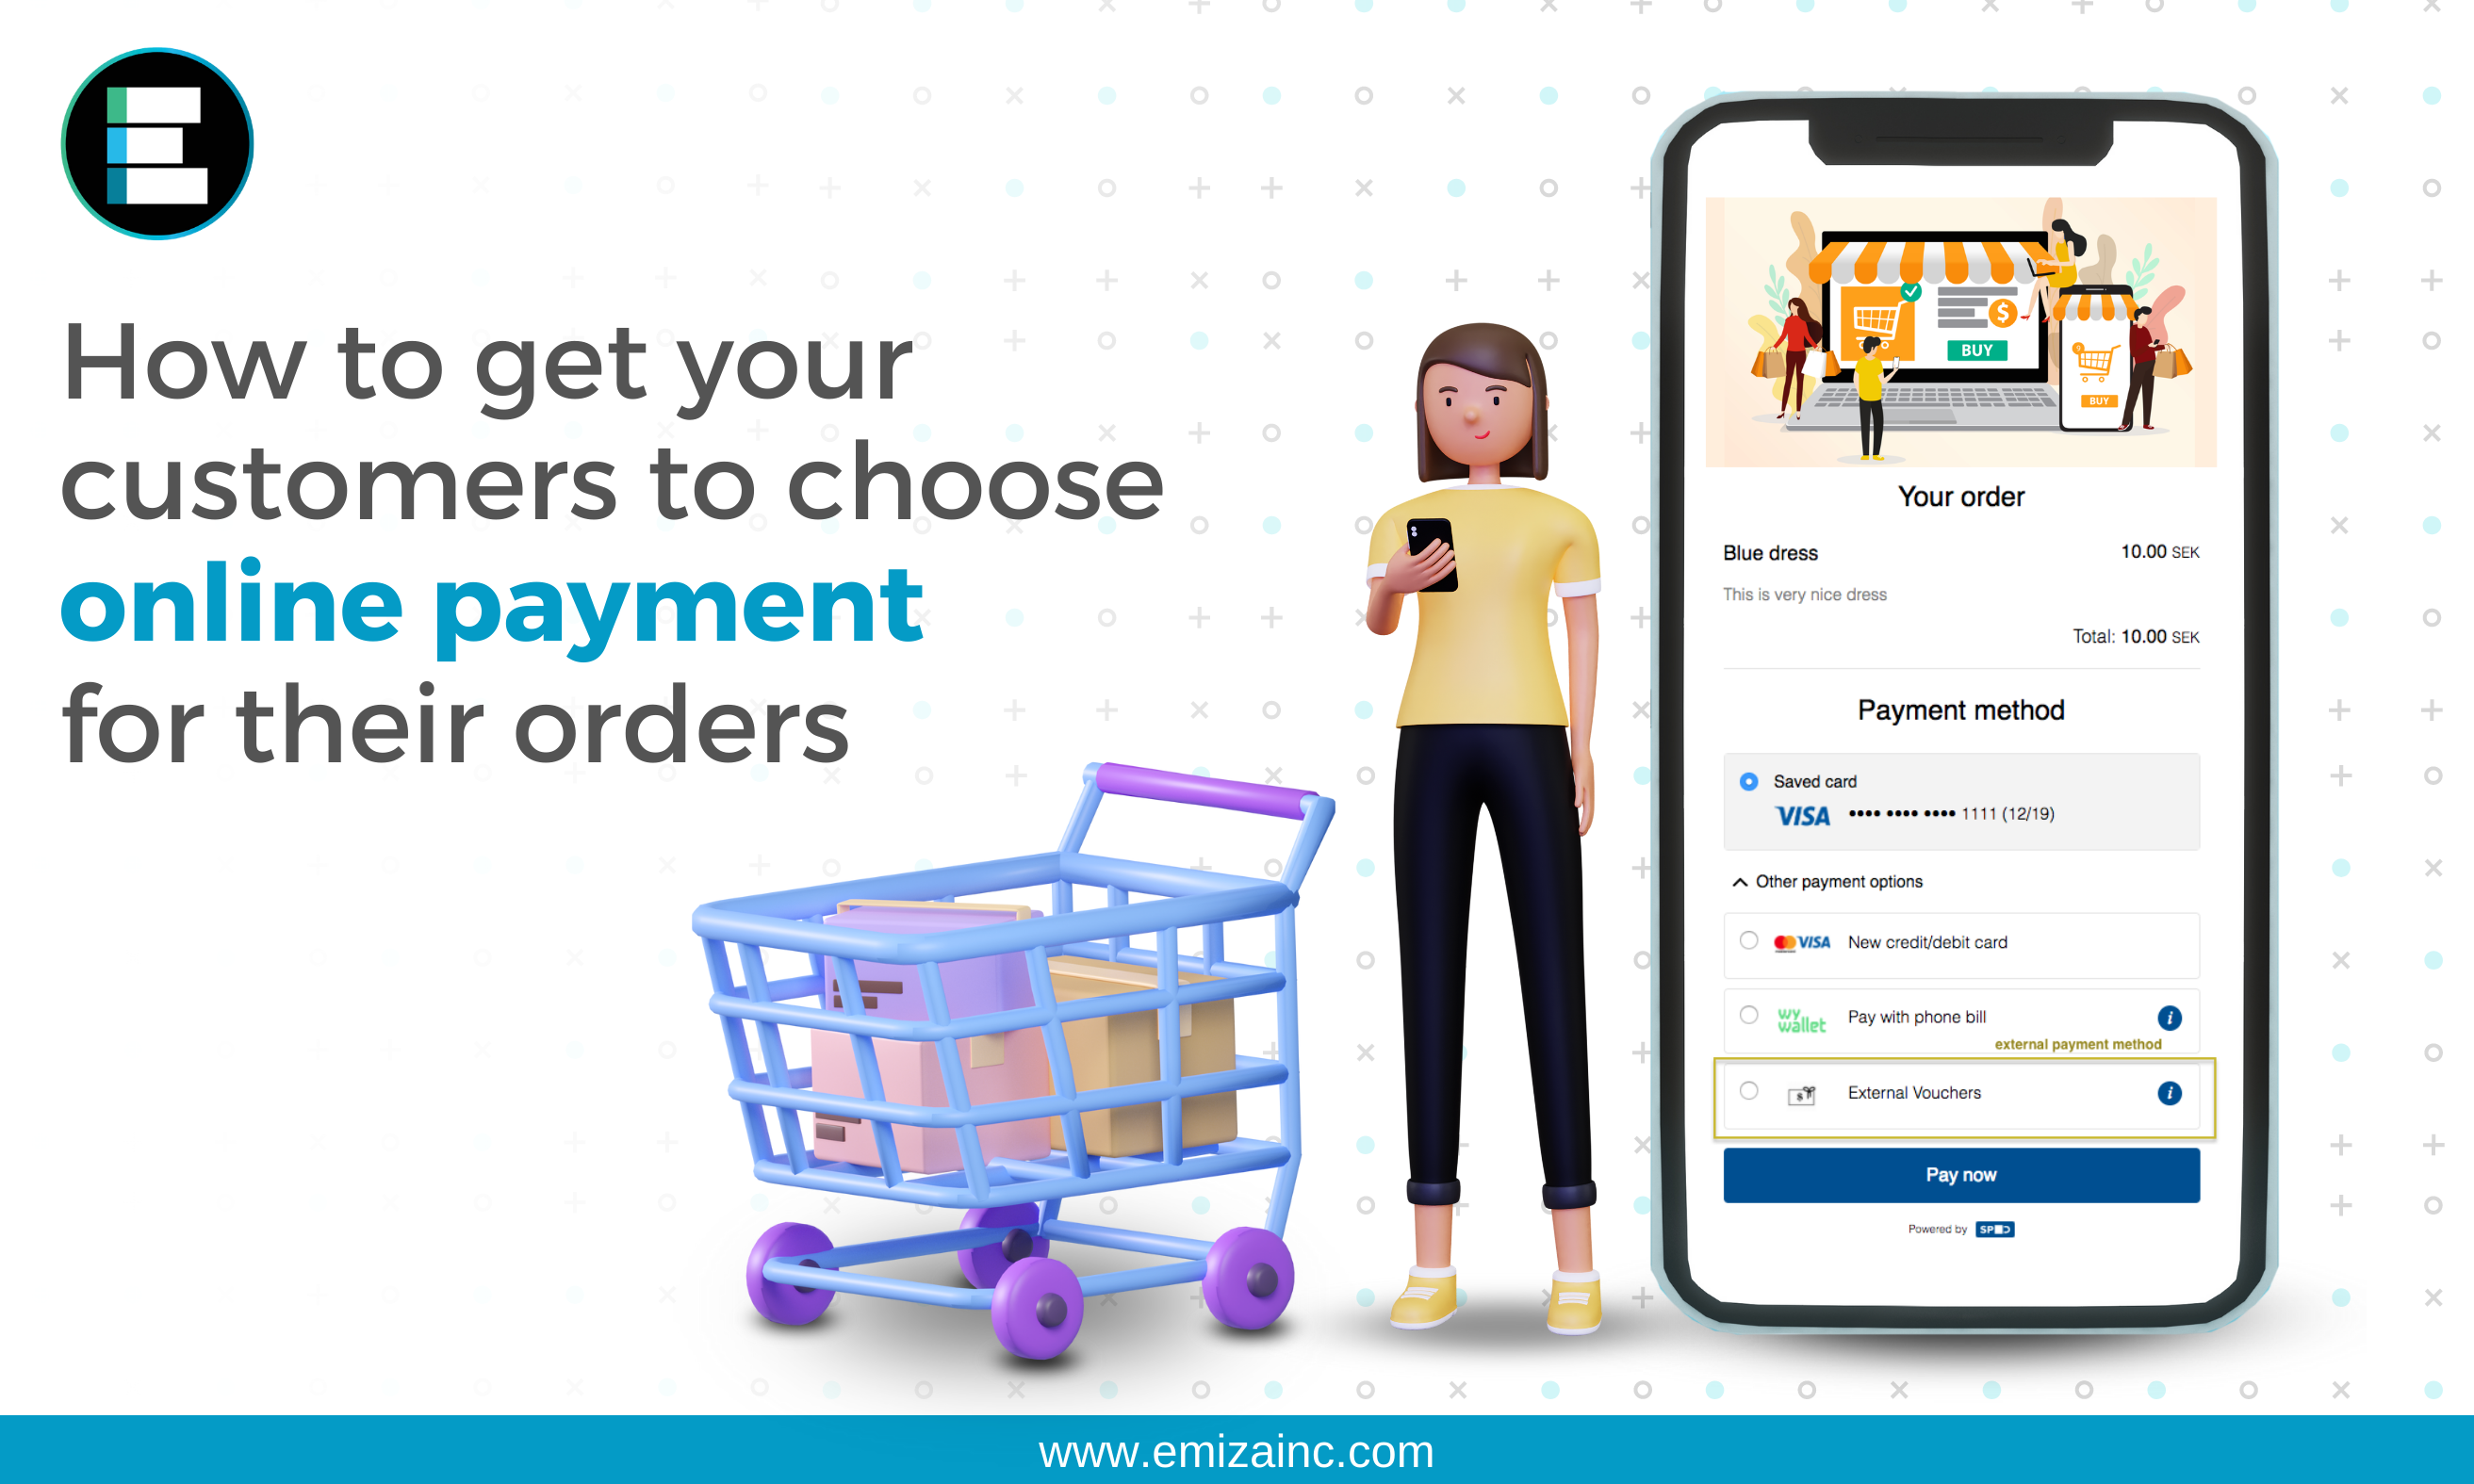 How to get your customers to choose online payment for their orders